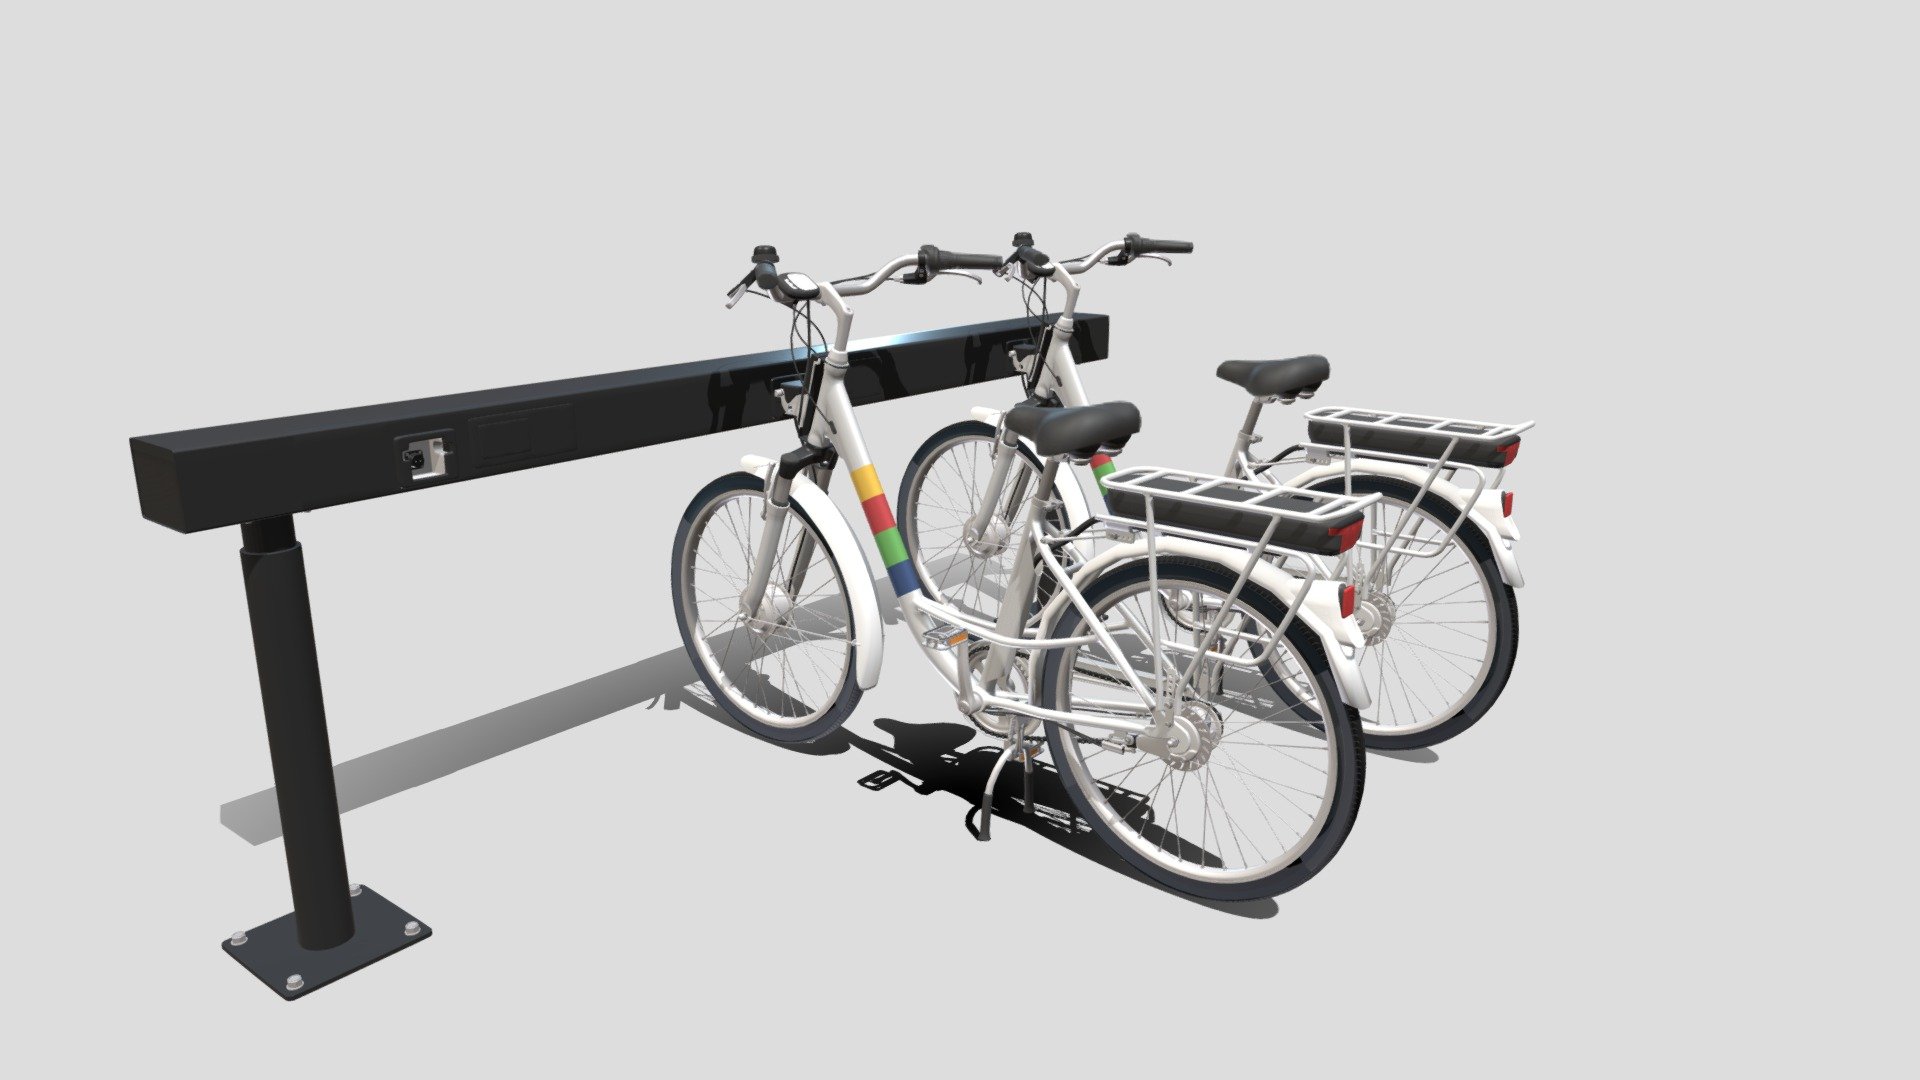 A very accurate model of an Electric Bicycle and Docking Station(Charging Station).

File formats:
-.blend, rendered with cycles, as seen in the images;
-.obj, with materials applied and textures;
-.dae, with materials applied and textures;
-.fbx, with material slots applied;
-.stl;

Note:
Each file format comes with two files included, one with just the bike, and another with the Docking Station and bikes attached(just like in the previews). There are 10 files in total.

3D Software:
This 3d model was originally created in Blender 2.79 and rendered with Cycles.

Materials and textures:
The model has materials applied in all formats, and is ready to import and render.
The model comes with multiple png image textures.

Preview scenes:
The preview images are rendered in Blender using its built-in render engine &lsquo;Cycles'.
Note that the blend files come directly with the rendering scene included and the render command will - Electric City Bicycle and Station - Buy Royalty Free 3D model by dragosburian 3d model